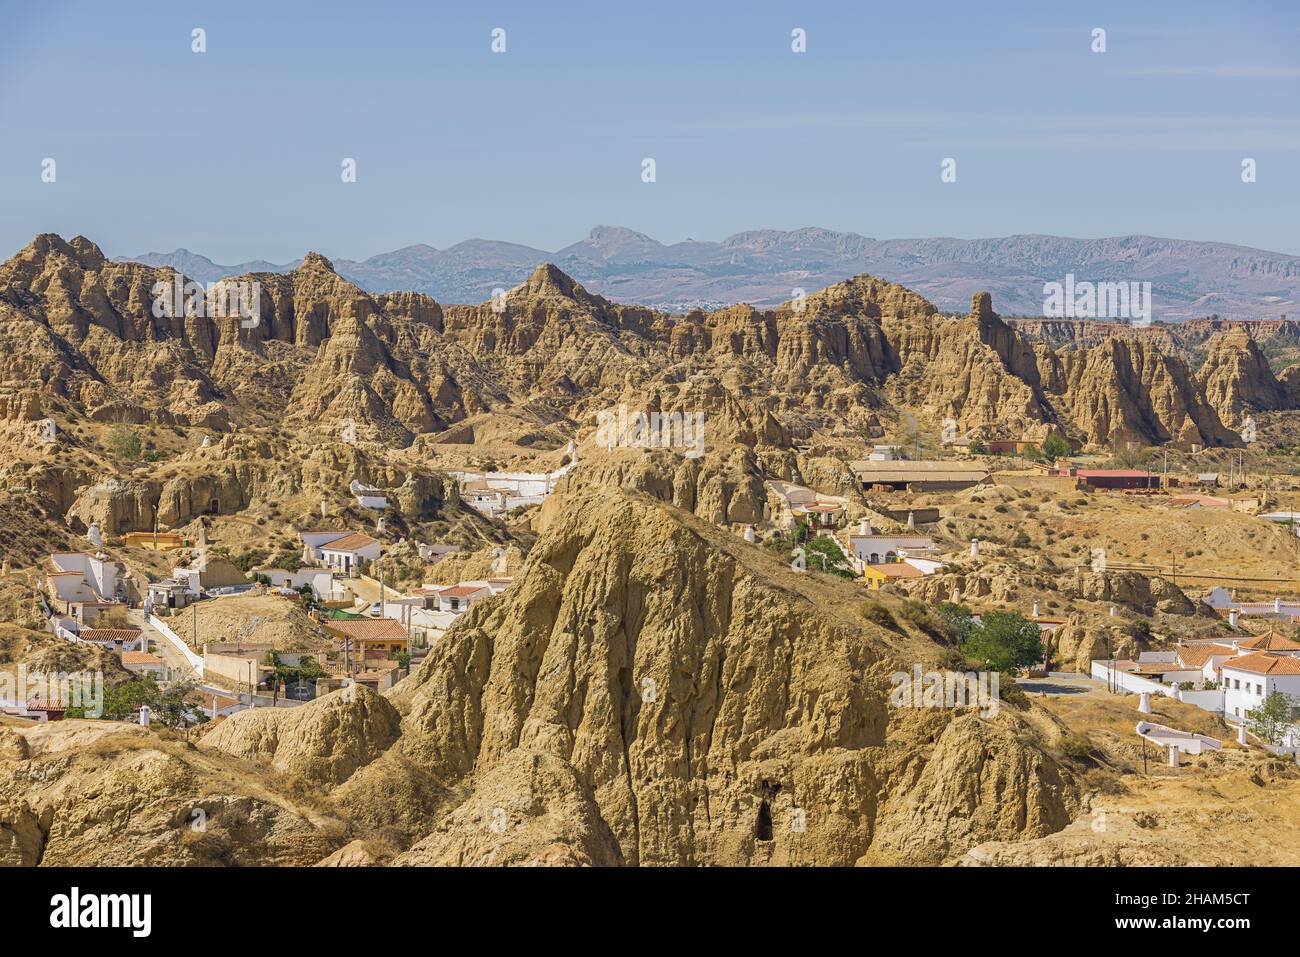 The cave house quarter with troglodyte habitations to protect from the heat in Guadix. The heat causes a blurry view for the distant mountains. Stock Photo